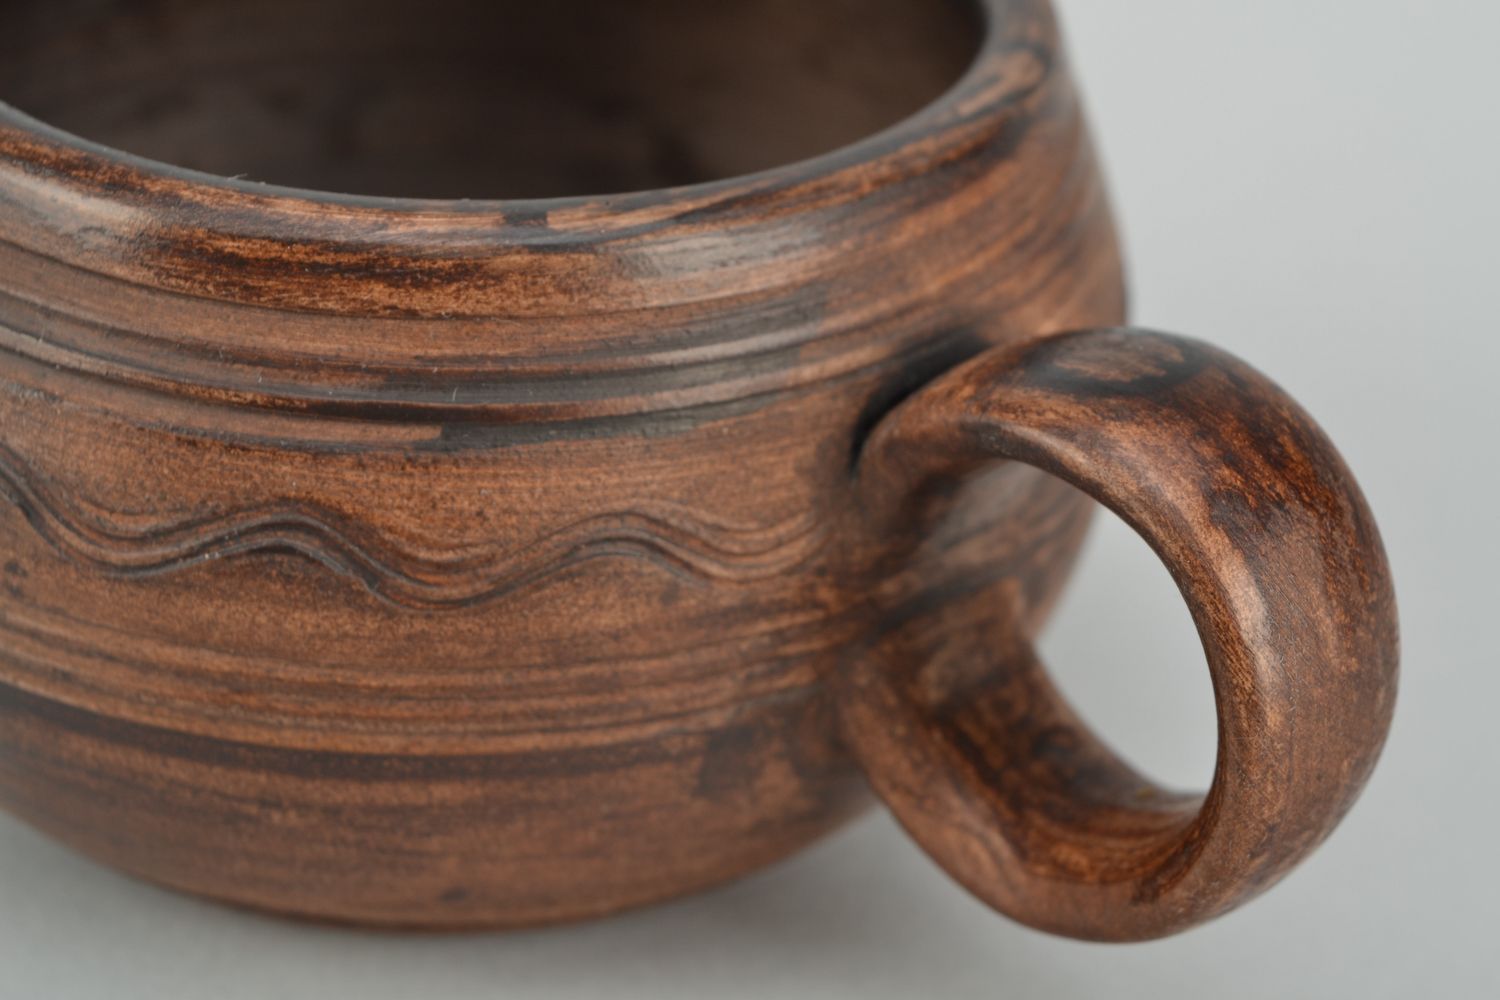 Medium size  5 oz clay cup in pot shape with handle in brown color photo 3